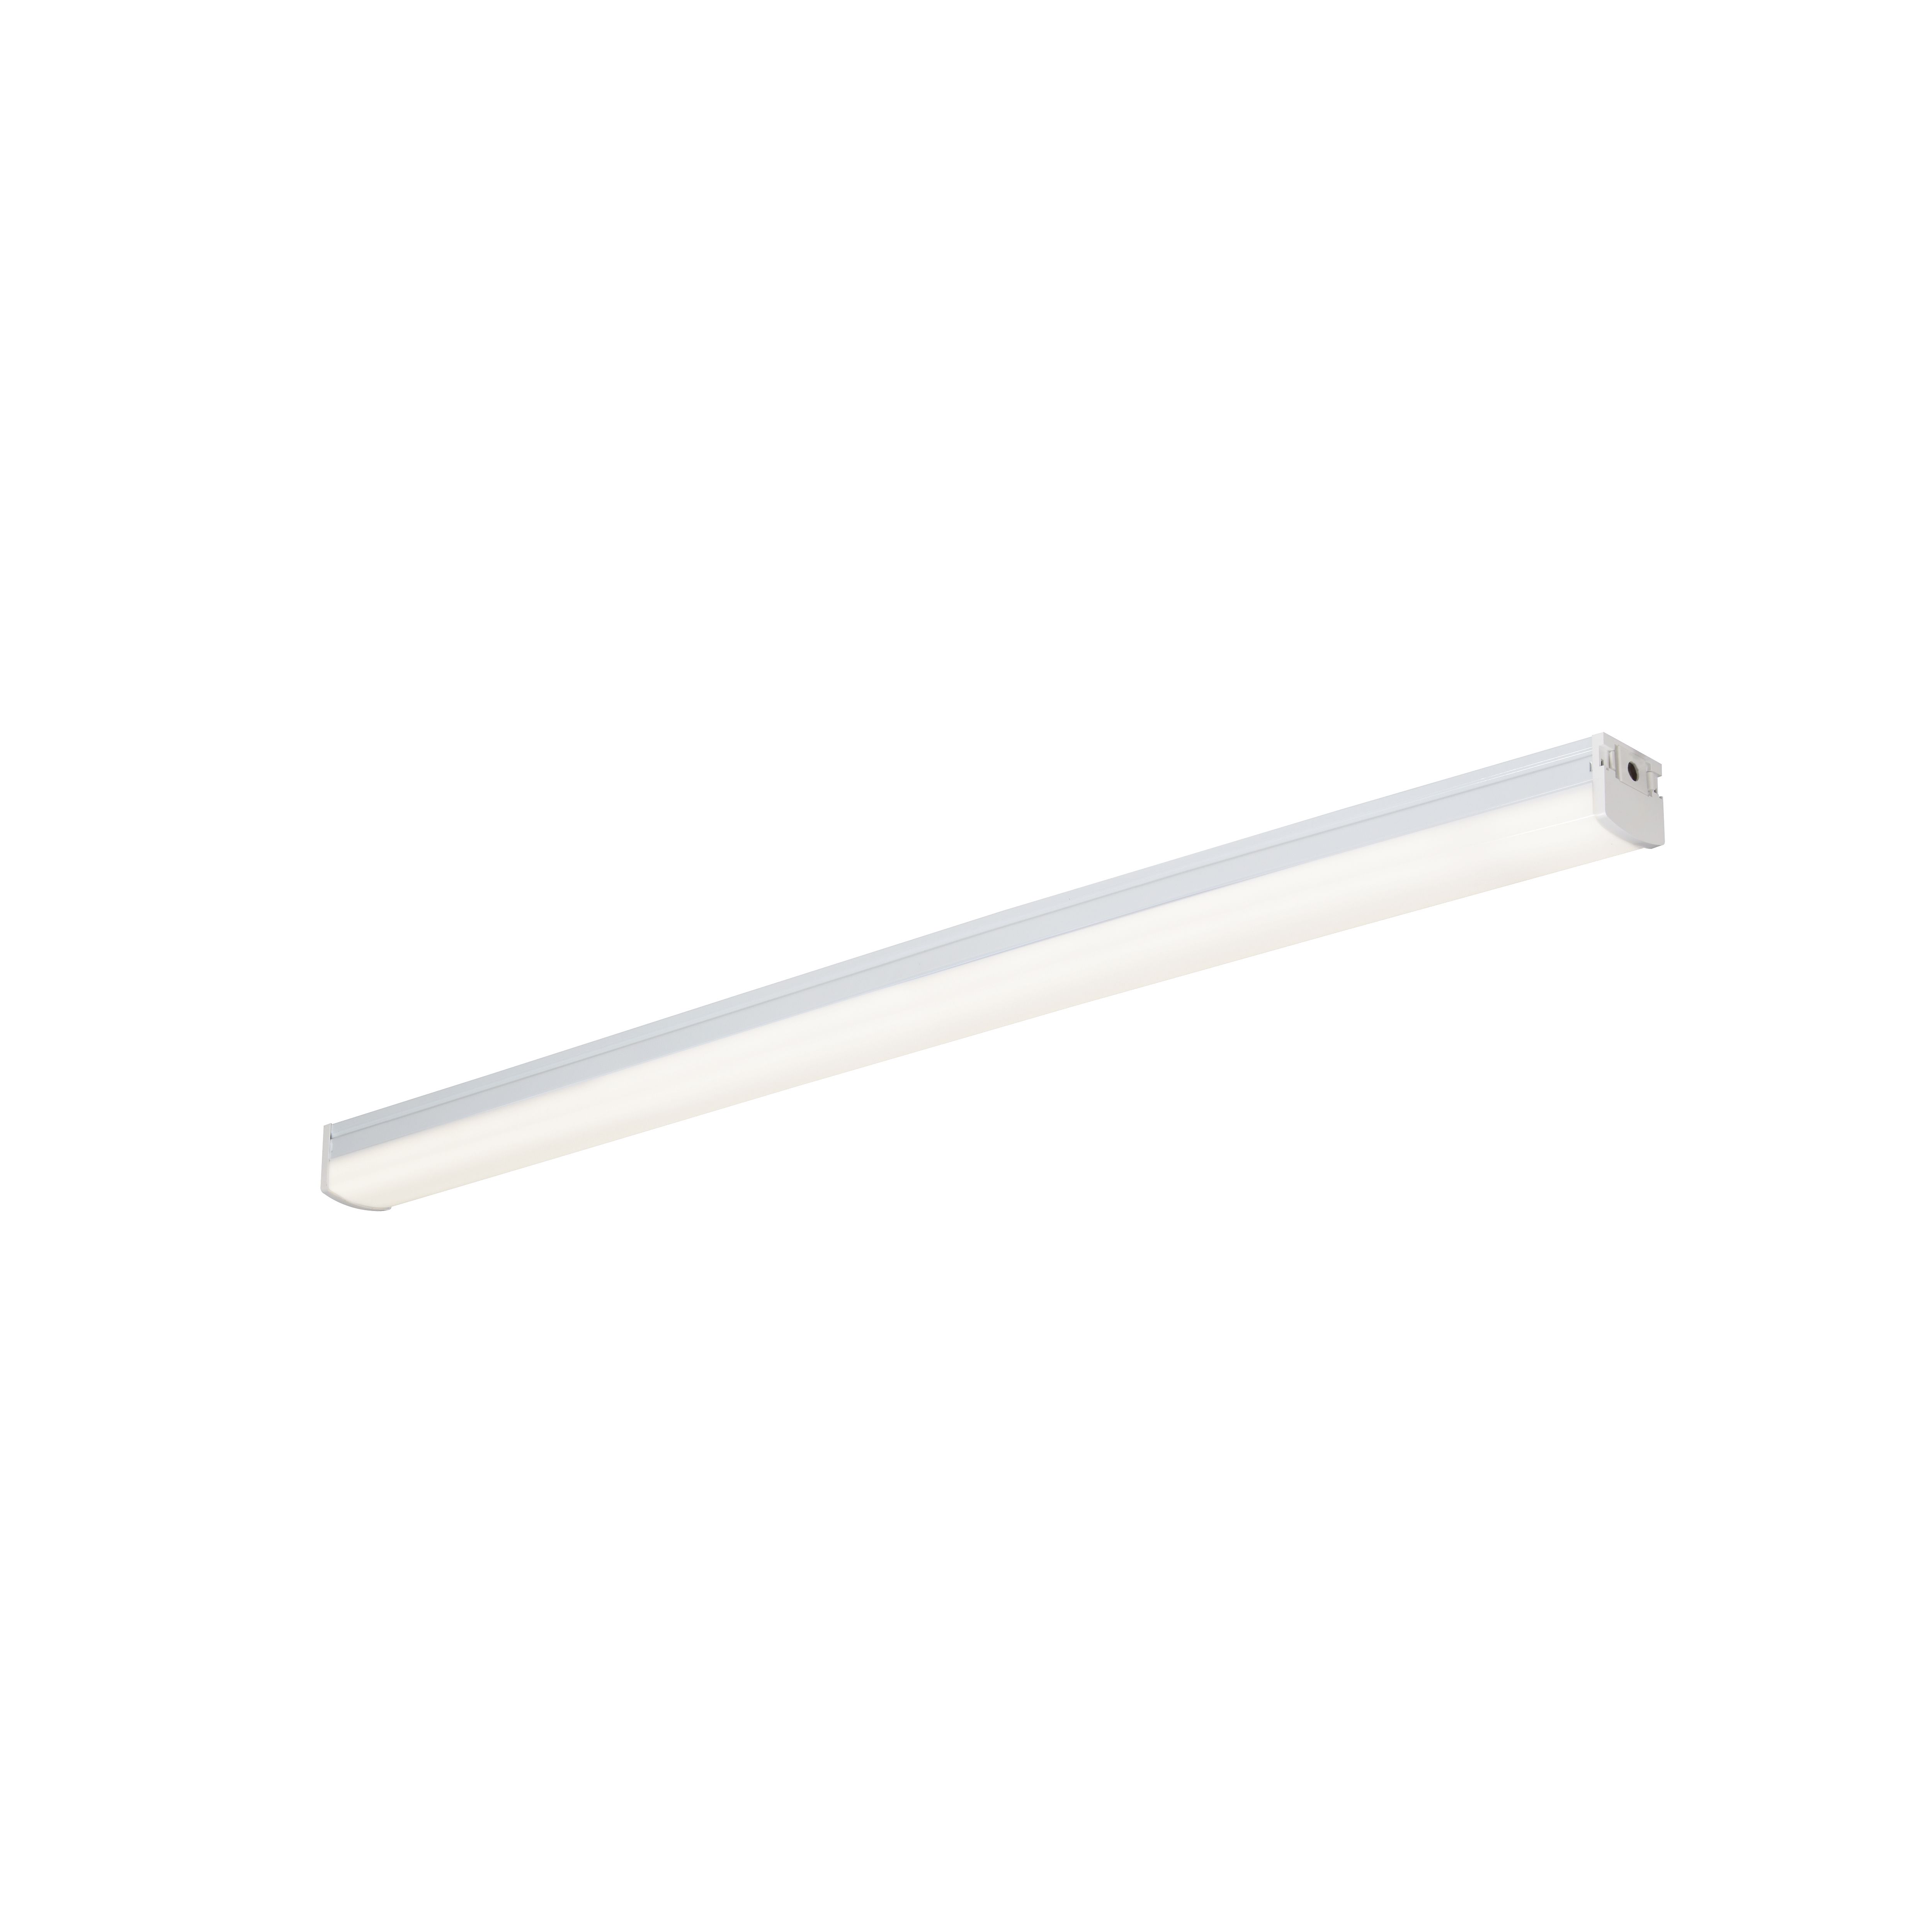 GoodHome Hovell Neutral white Integrated LED Batten 36.5W 4400lm (L)1.2m